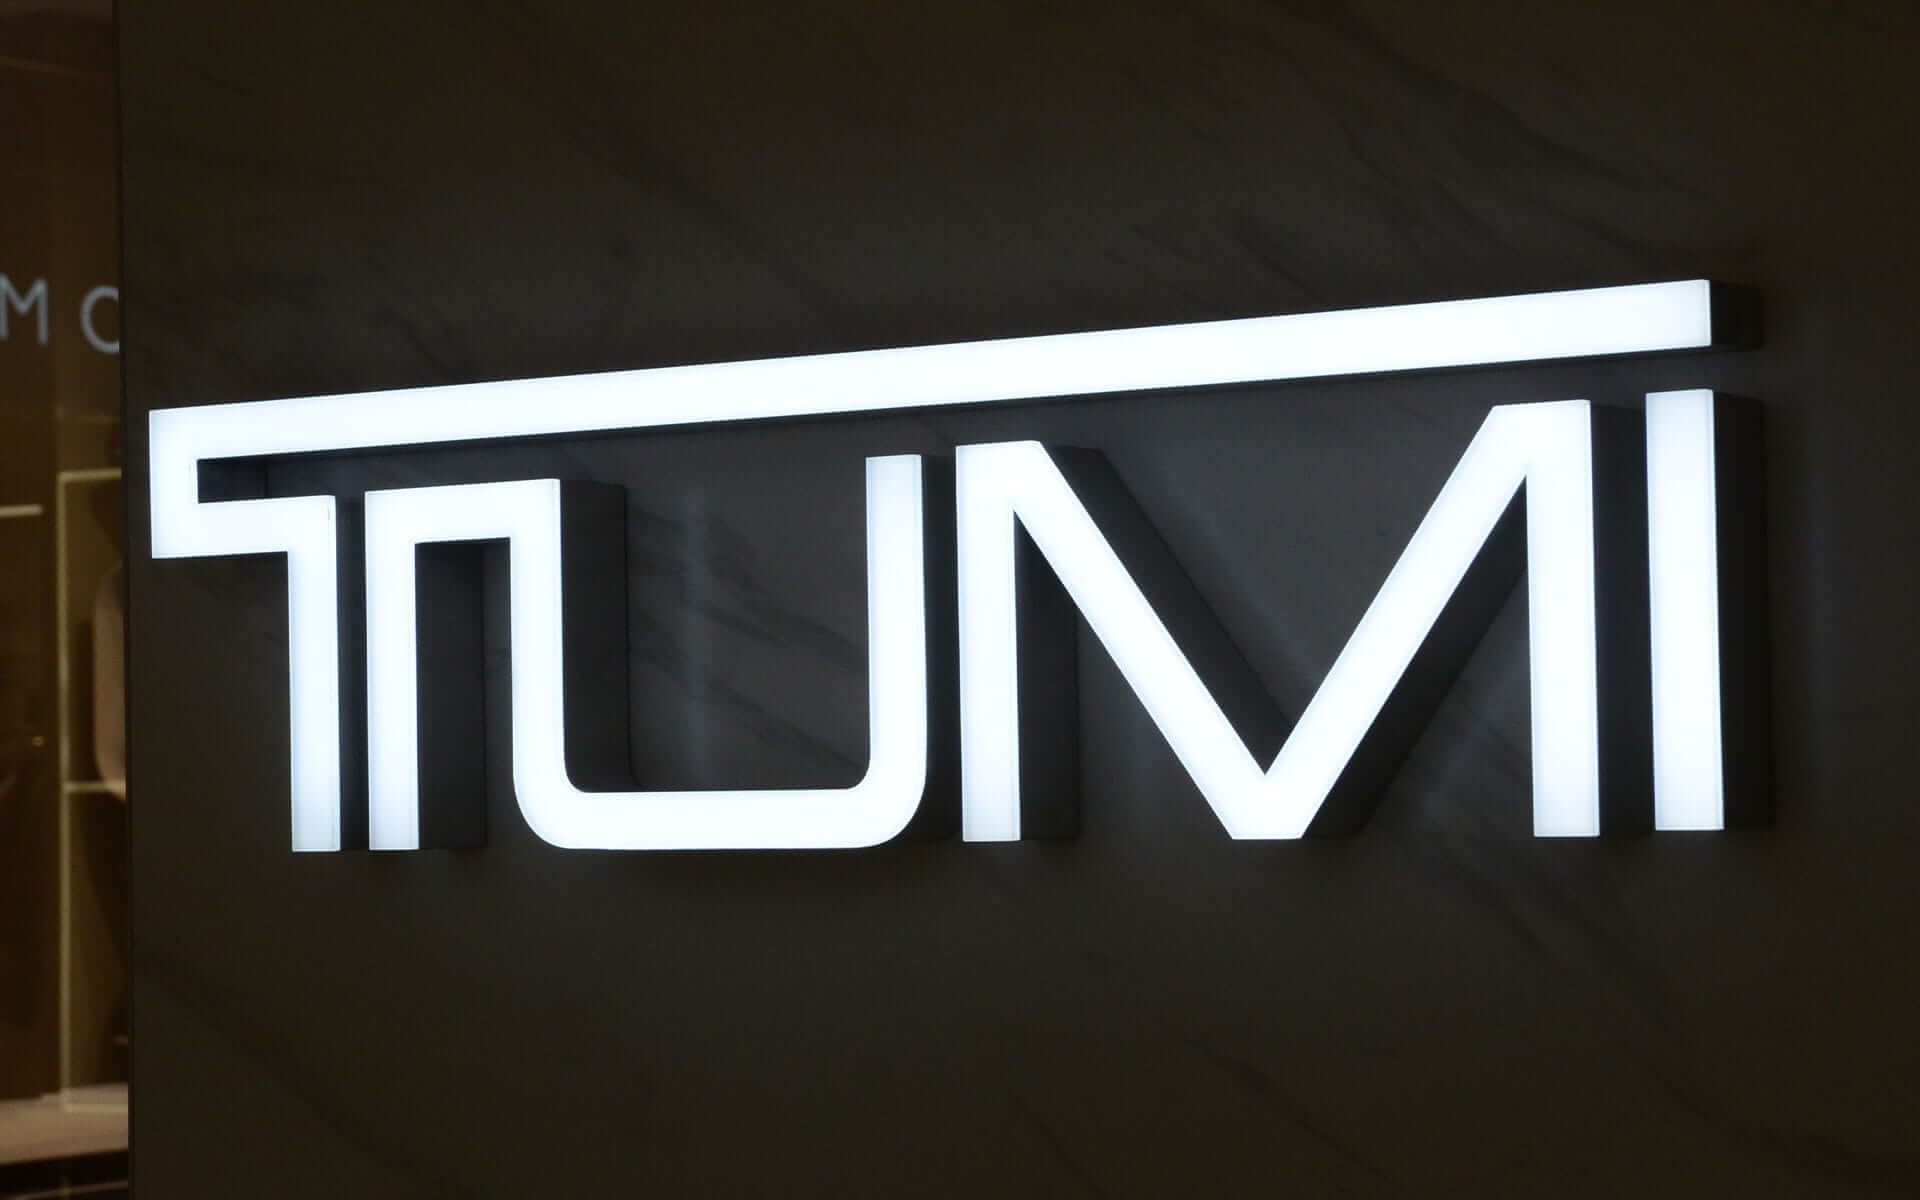 Trimless Face-lit Metal Channel Letters for Tumi